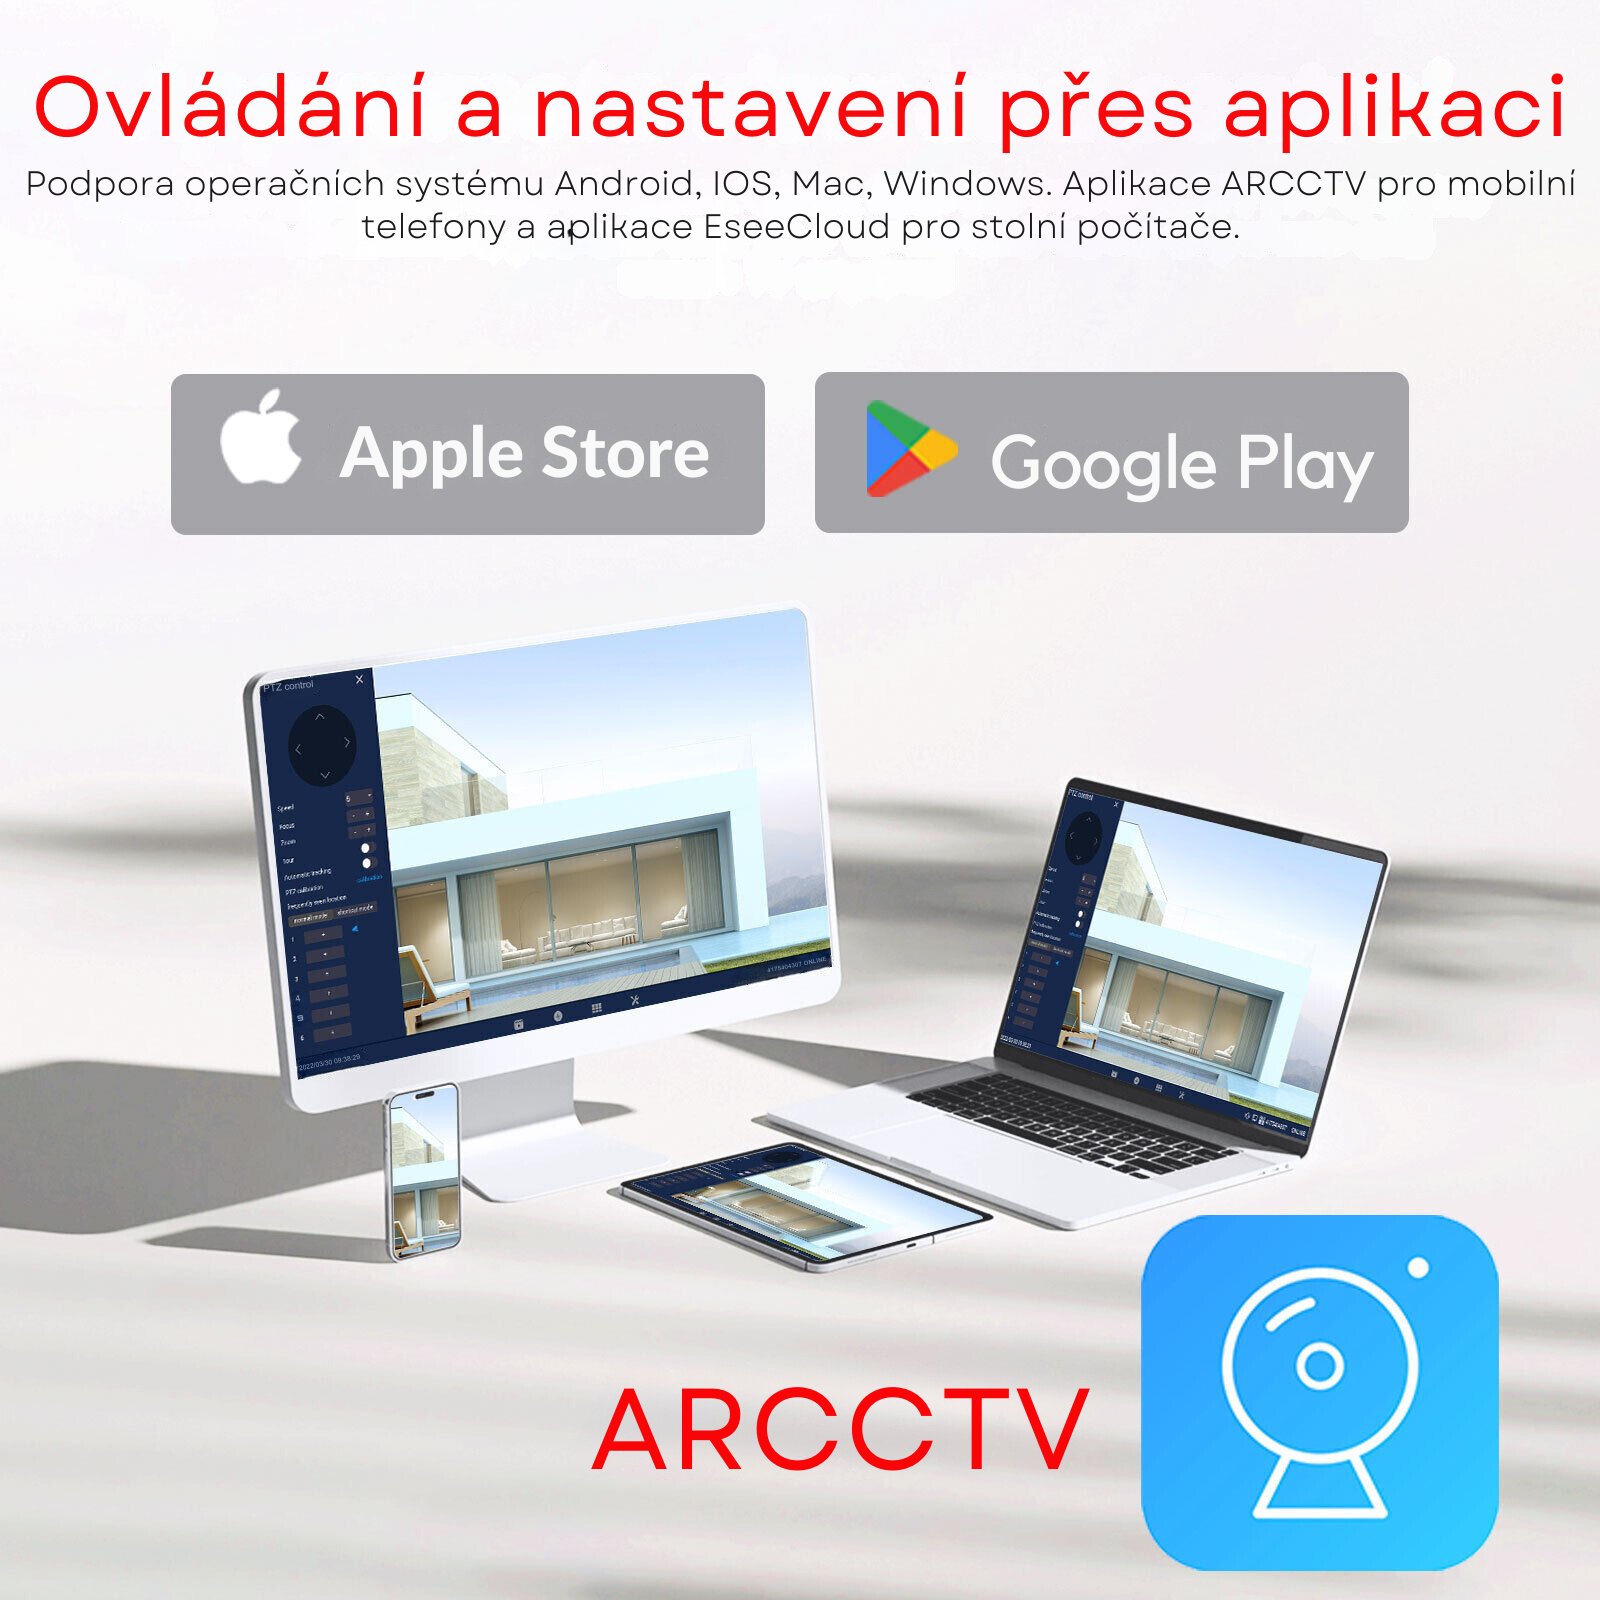 Ovládání a nastavení přes aplikaci Support Android, IOS, Mac, Windows, Tablet. With the free ARCCTV APP and the EseeCloud software, you can take your family and home anywhere and watch TV anytime